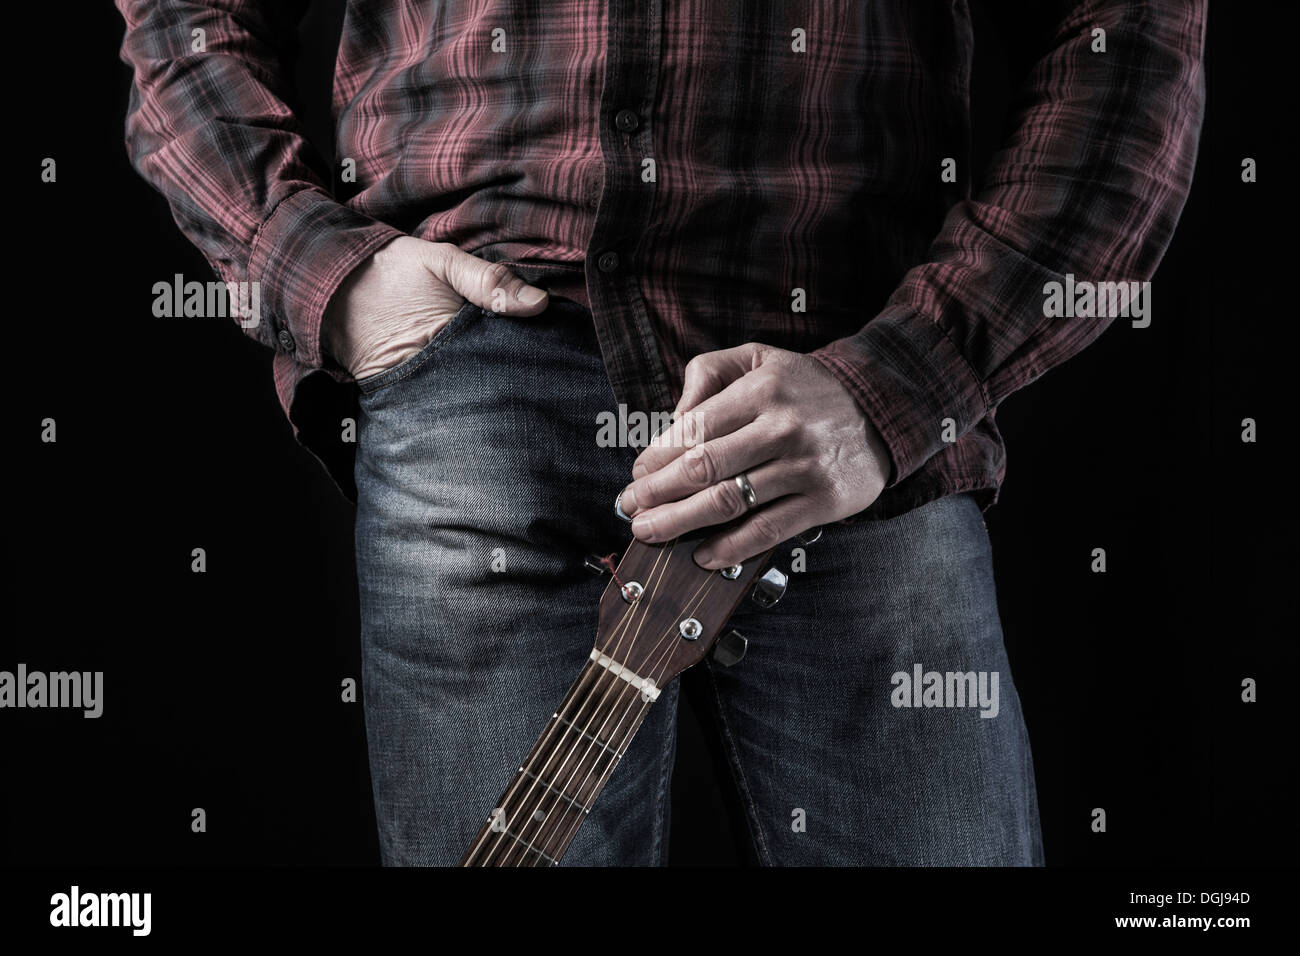 A man holding an acoustic guitar. Stock Photo